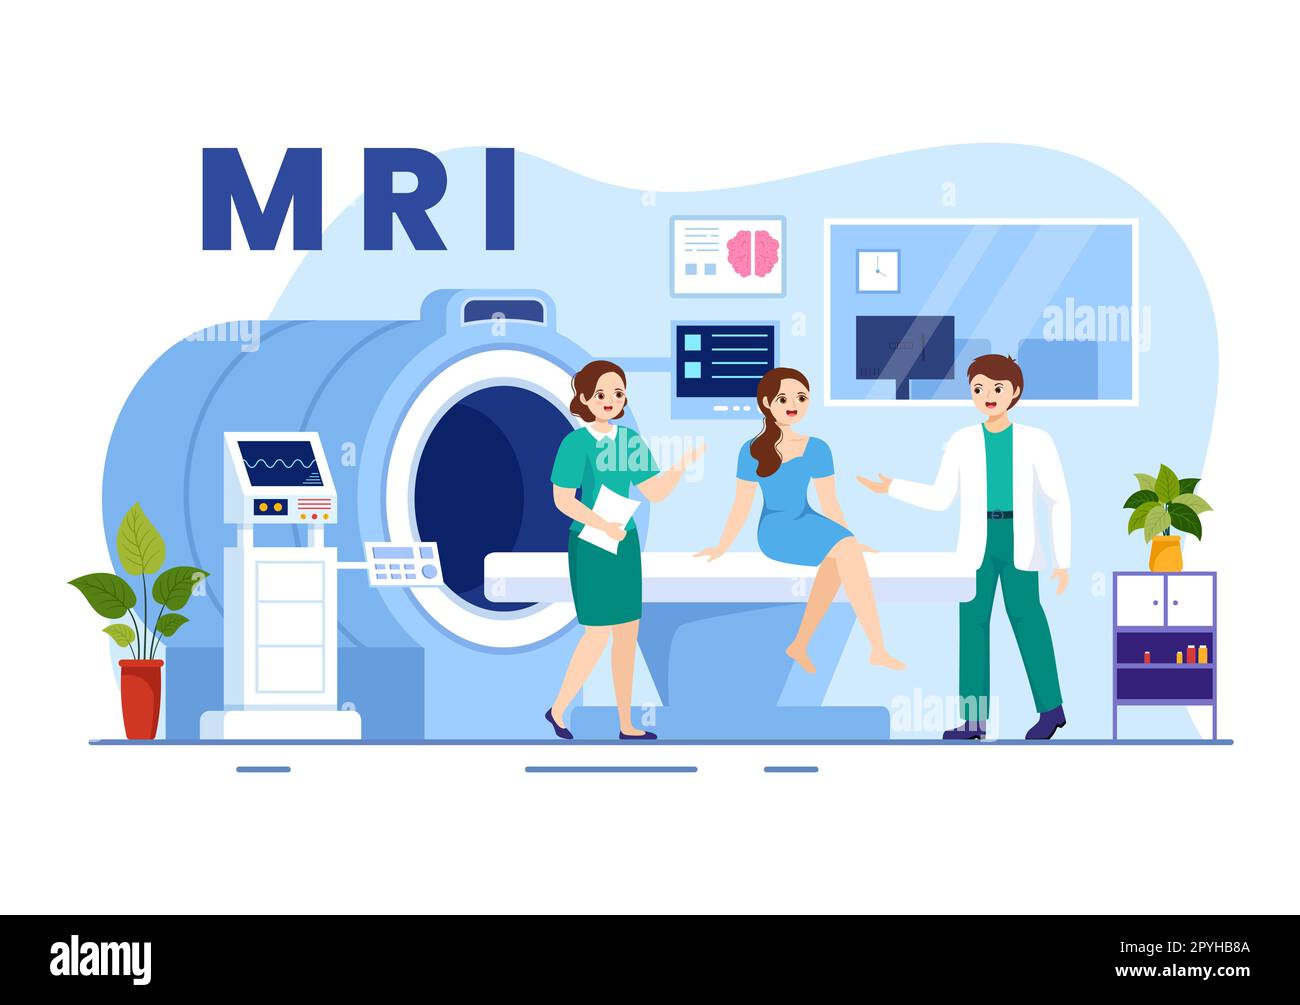 MRI or Magnetic Resonance Imaging Illustration with Doctor and Patient on Medical Examination and CT scan in Flat Cartoon Hand Drawn Templates Stock Photo